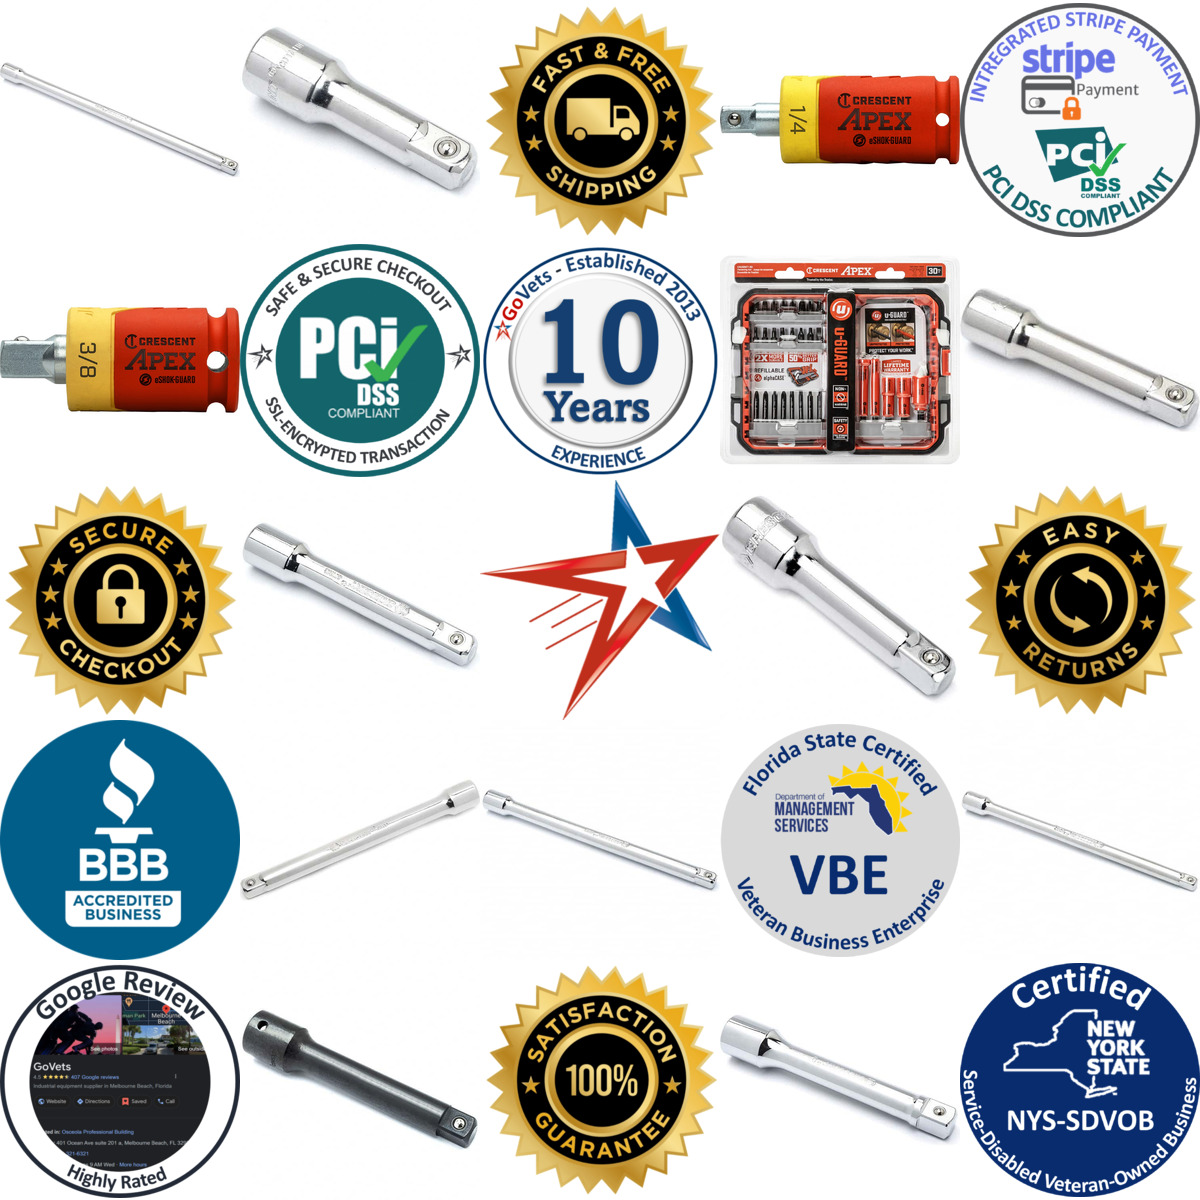 A selection of Crescent products on GoVets